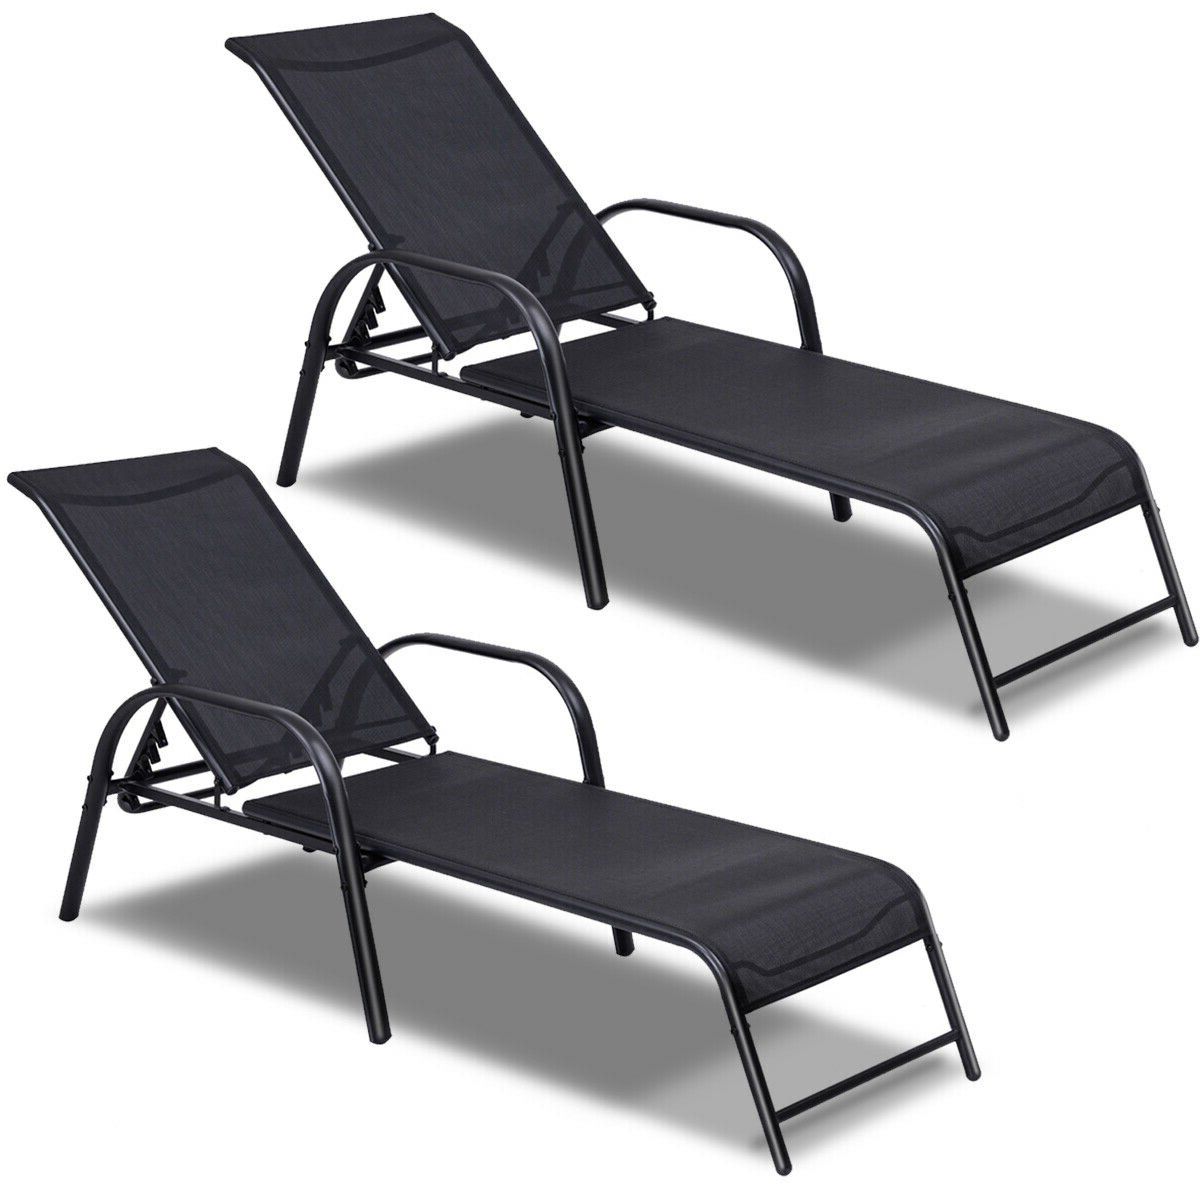 2020 Costway Set Of 2 Patio Lounge Chairs Sling Chaise Lounges Recliner  Adjustable Back Regarding Sling Patio Chaise Lounges (View 5 of 25)